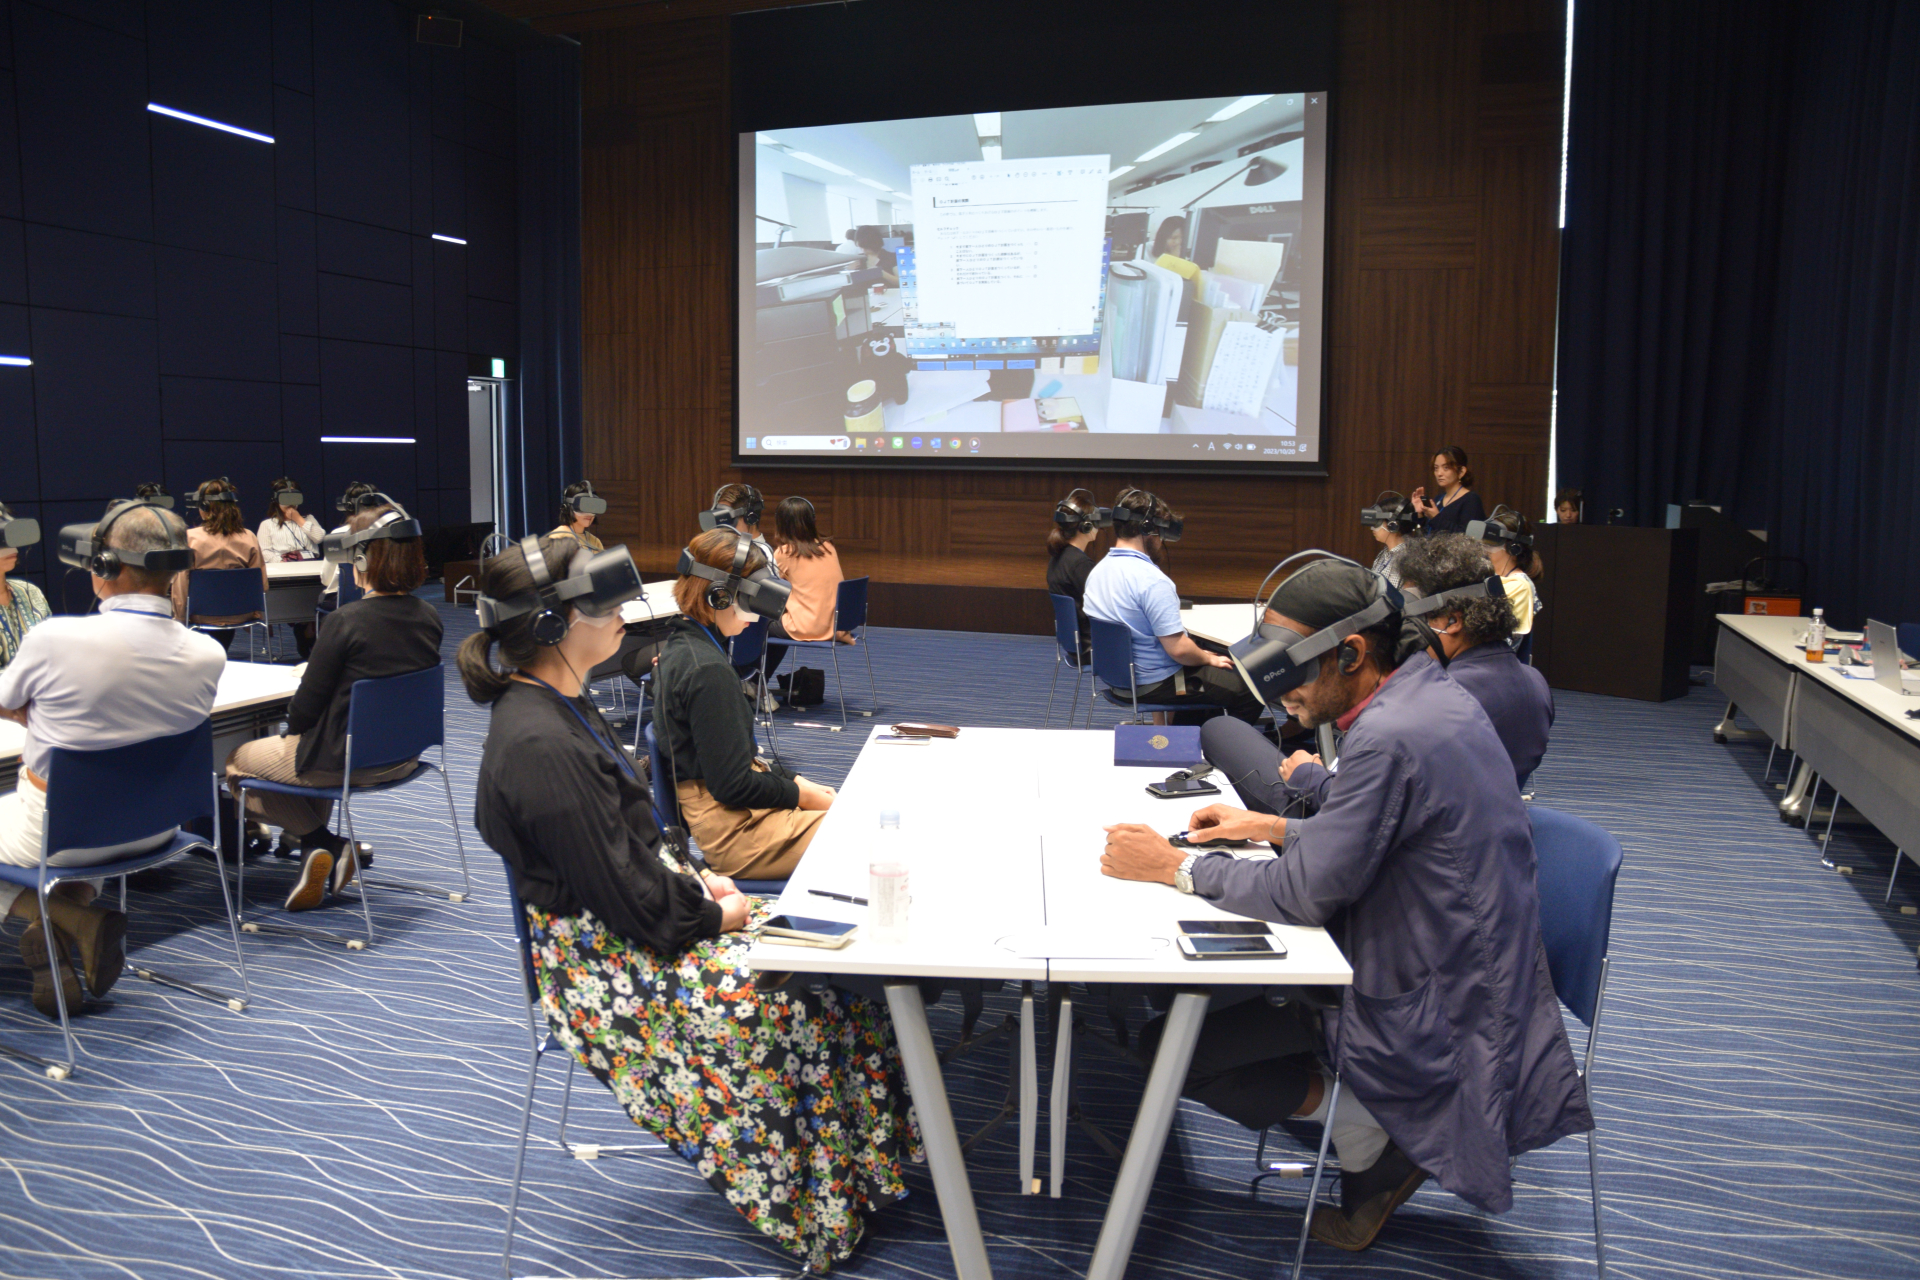 A scene from the unconscious bias training using VR headsets